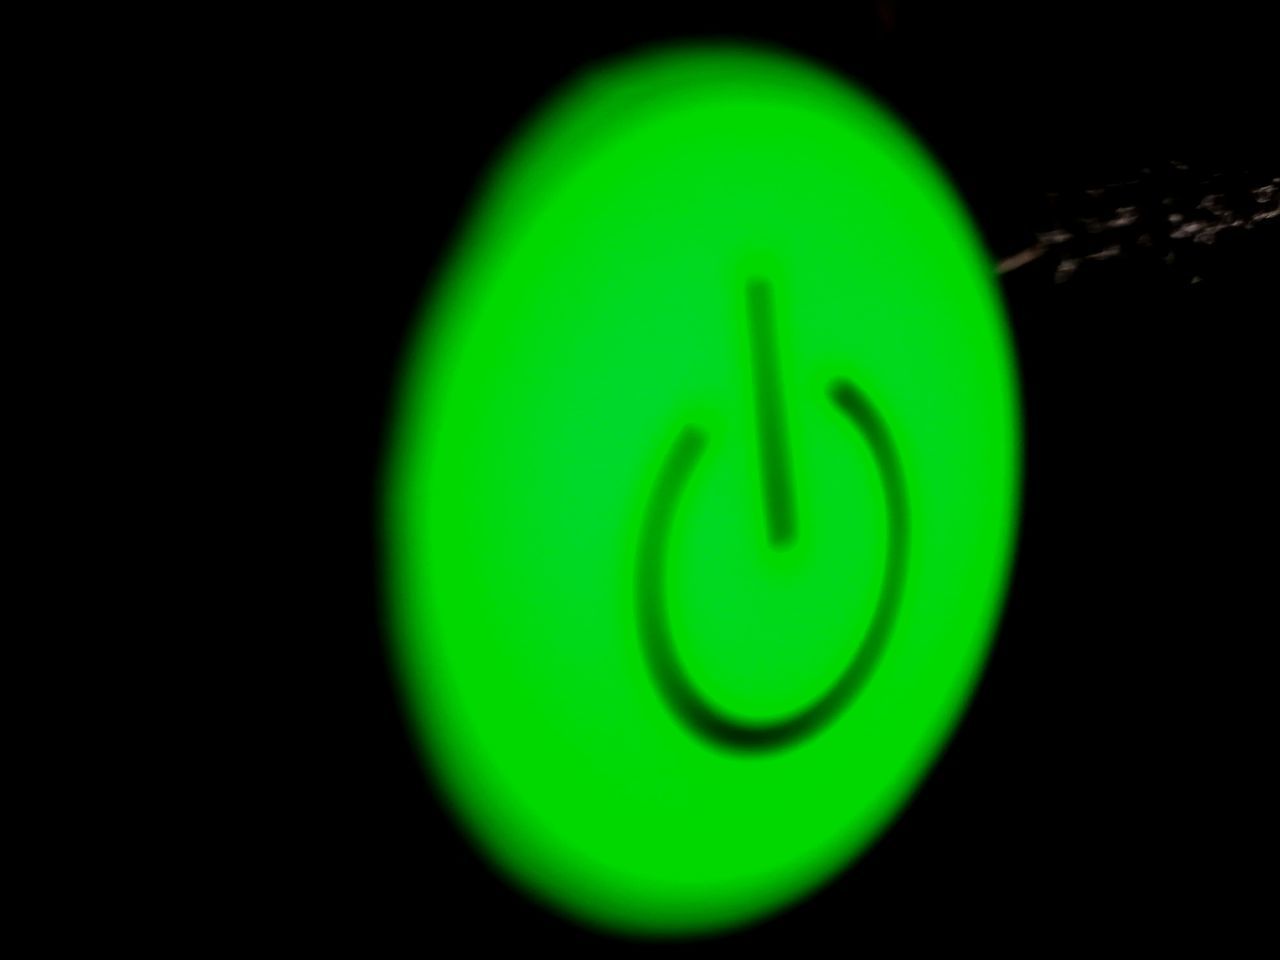 CLOSE-UP OF GREEN LIGHT AGAINST BLACK BACKGROUND AGAINST BLURRED WALL